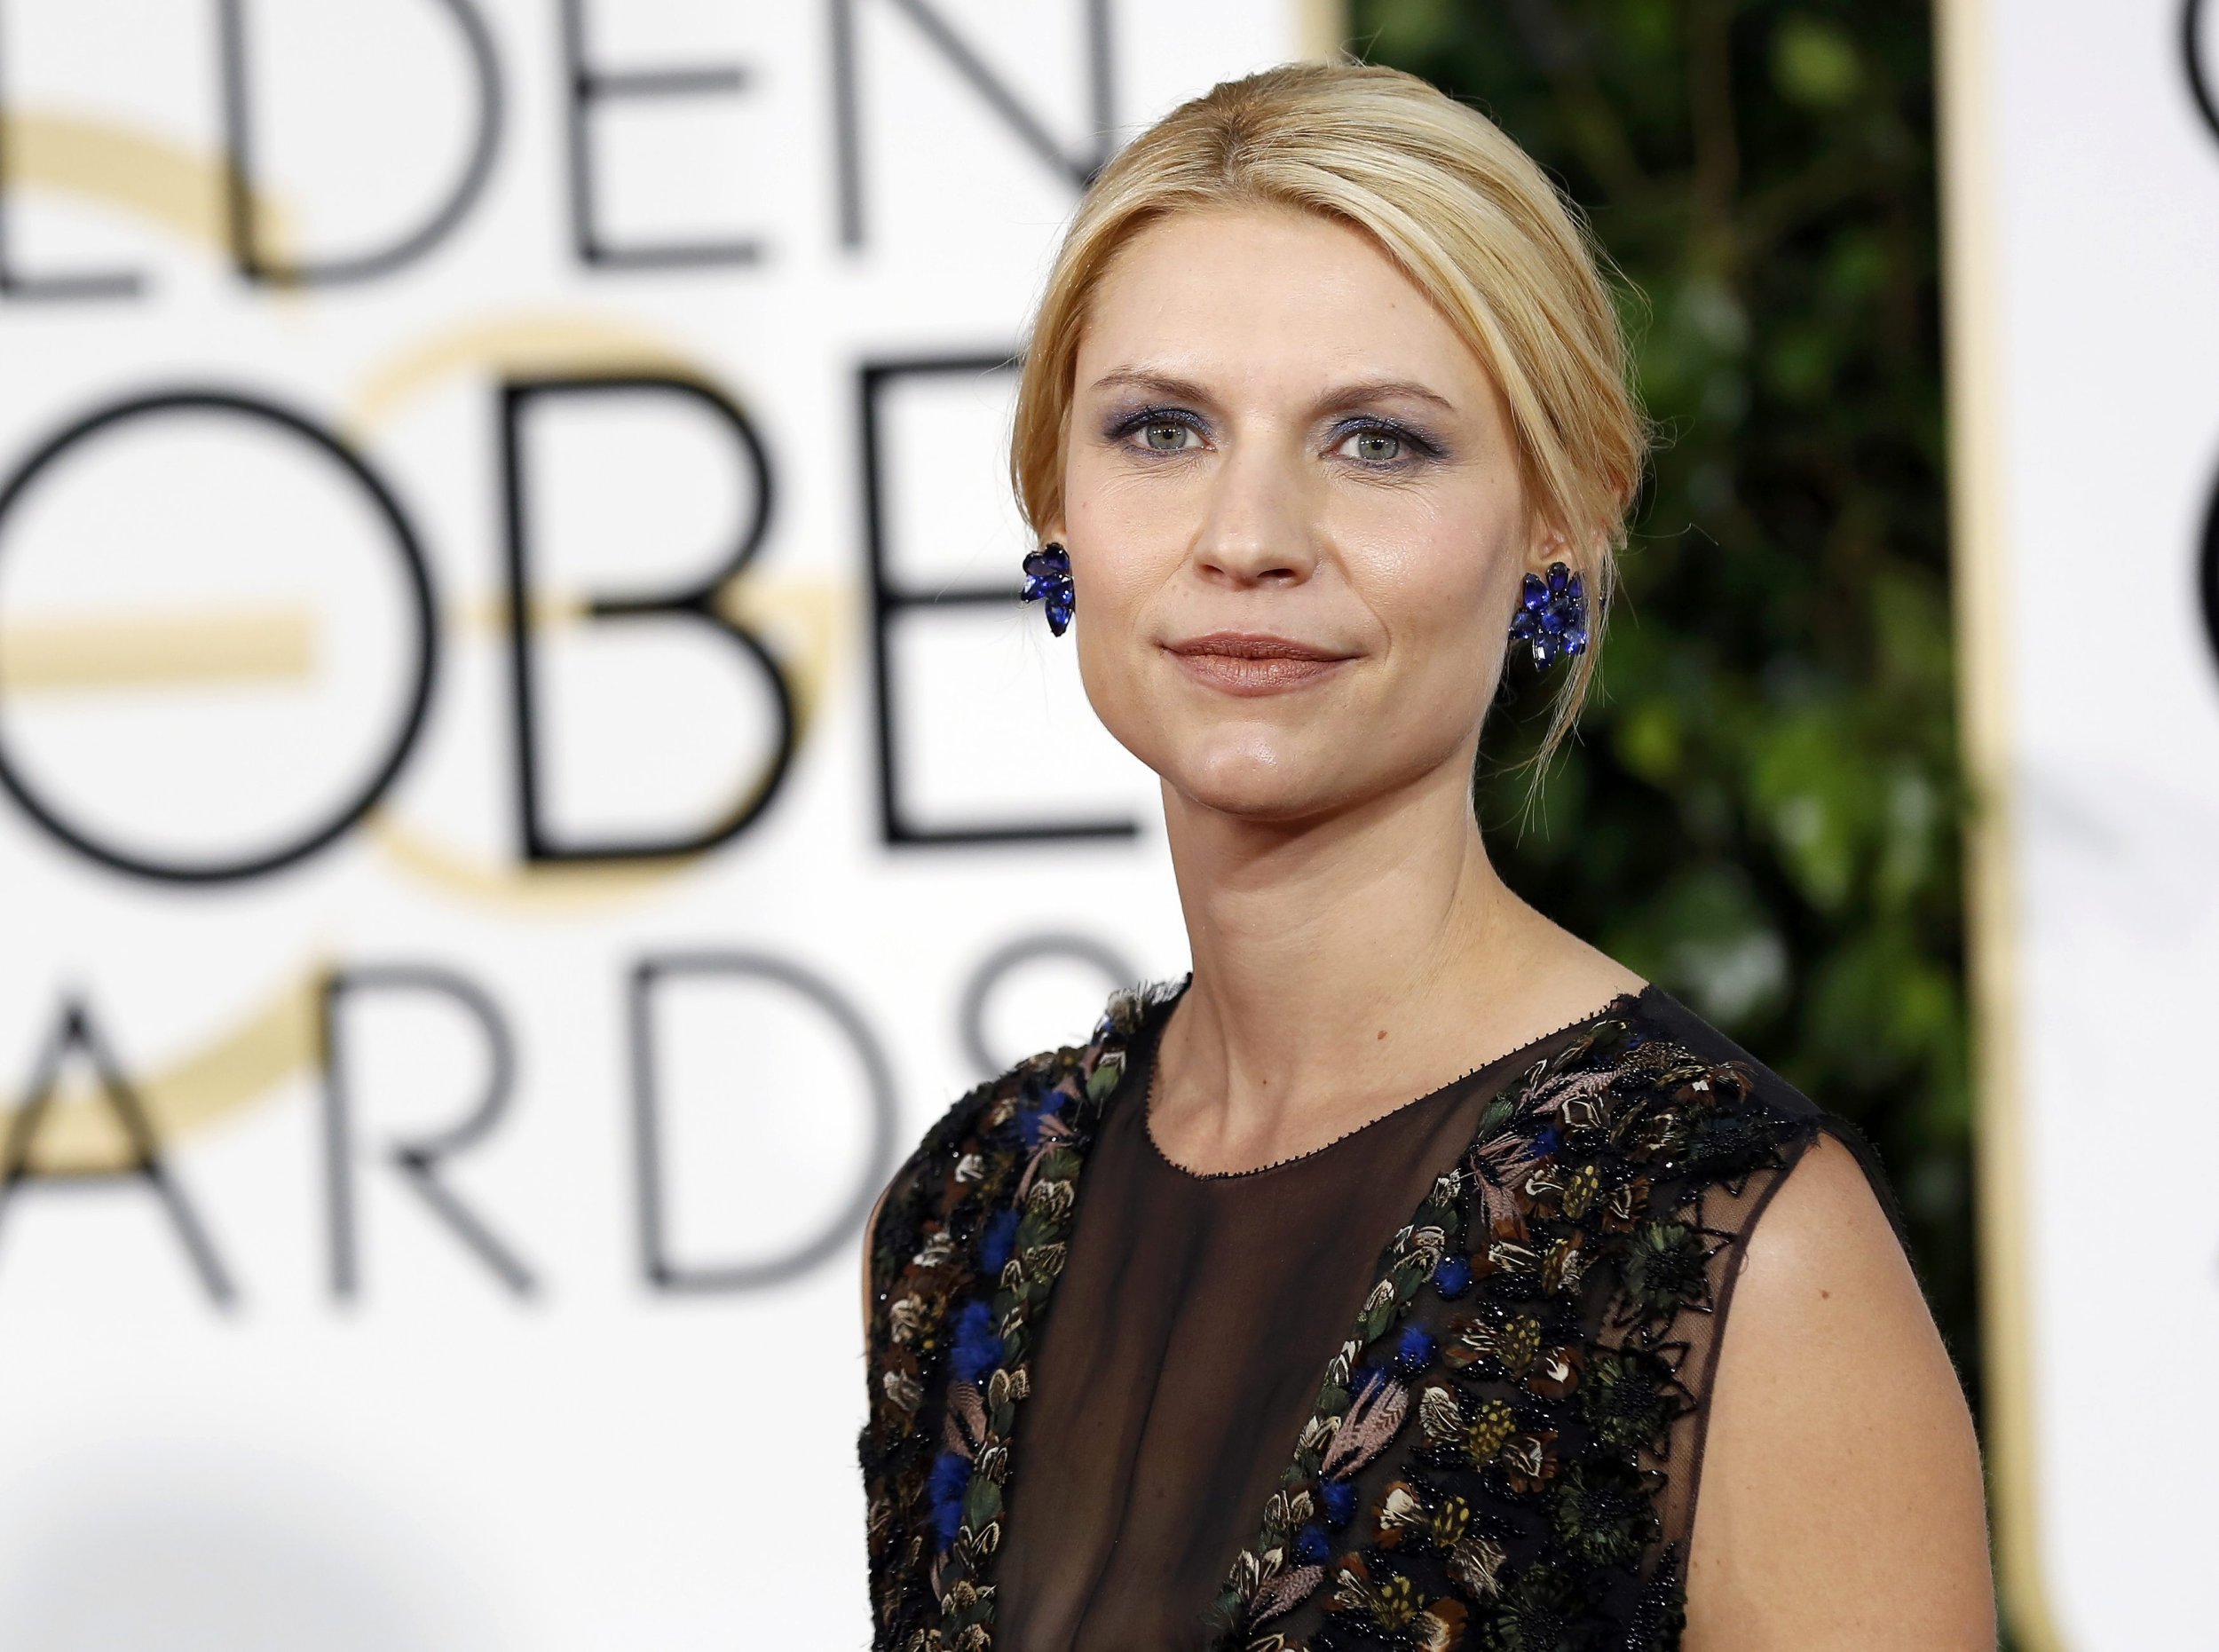 Claire Danes at Golden Globes After Announcing Her Pregnancy